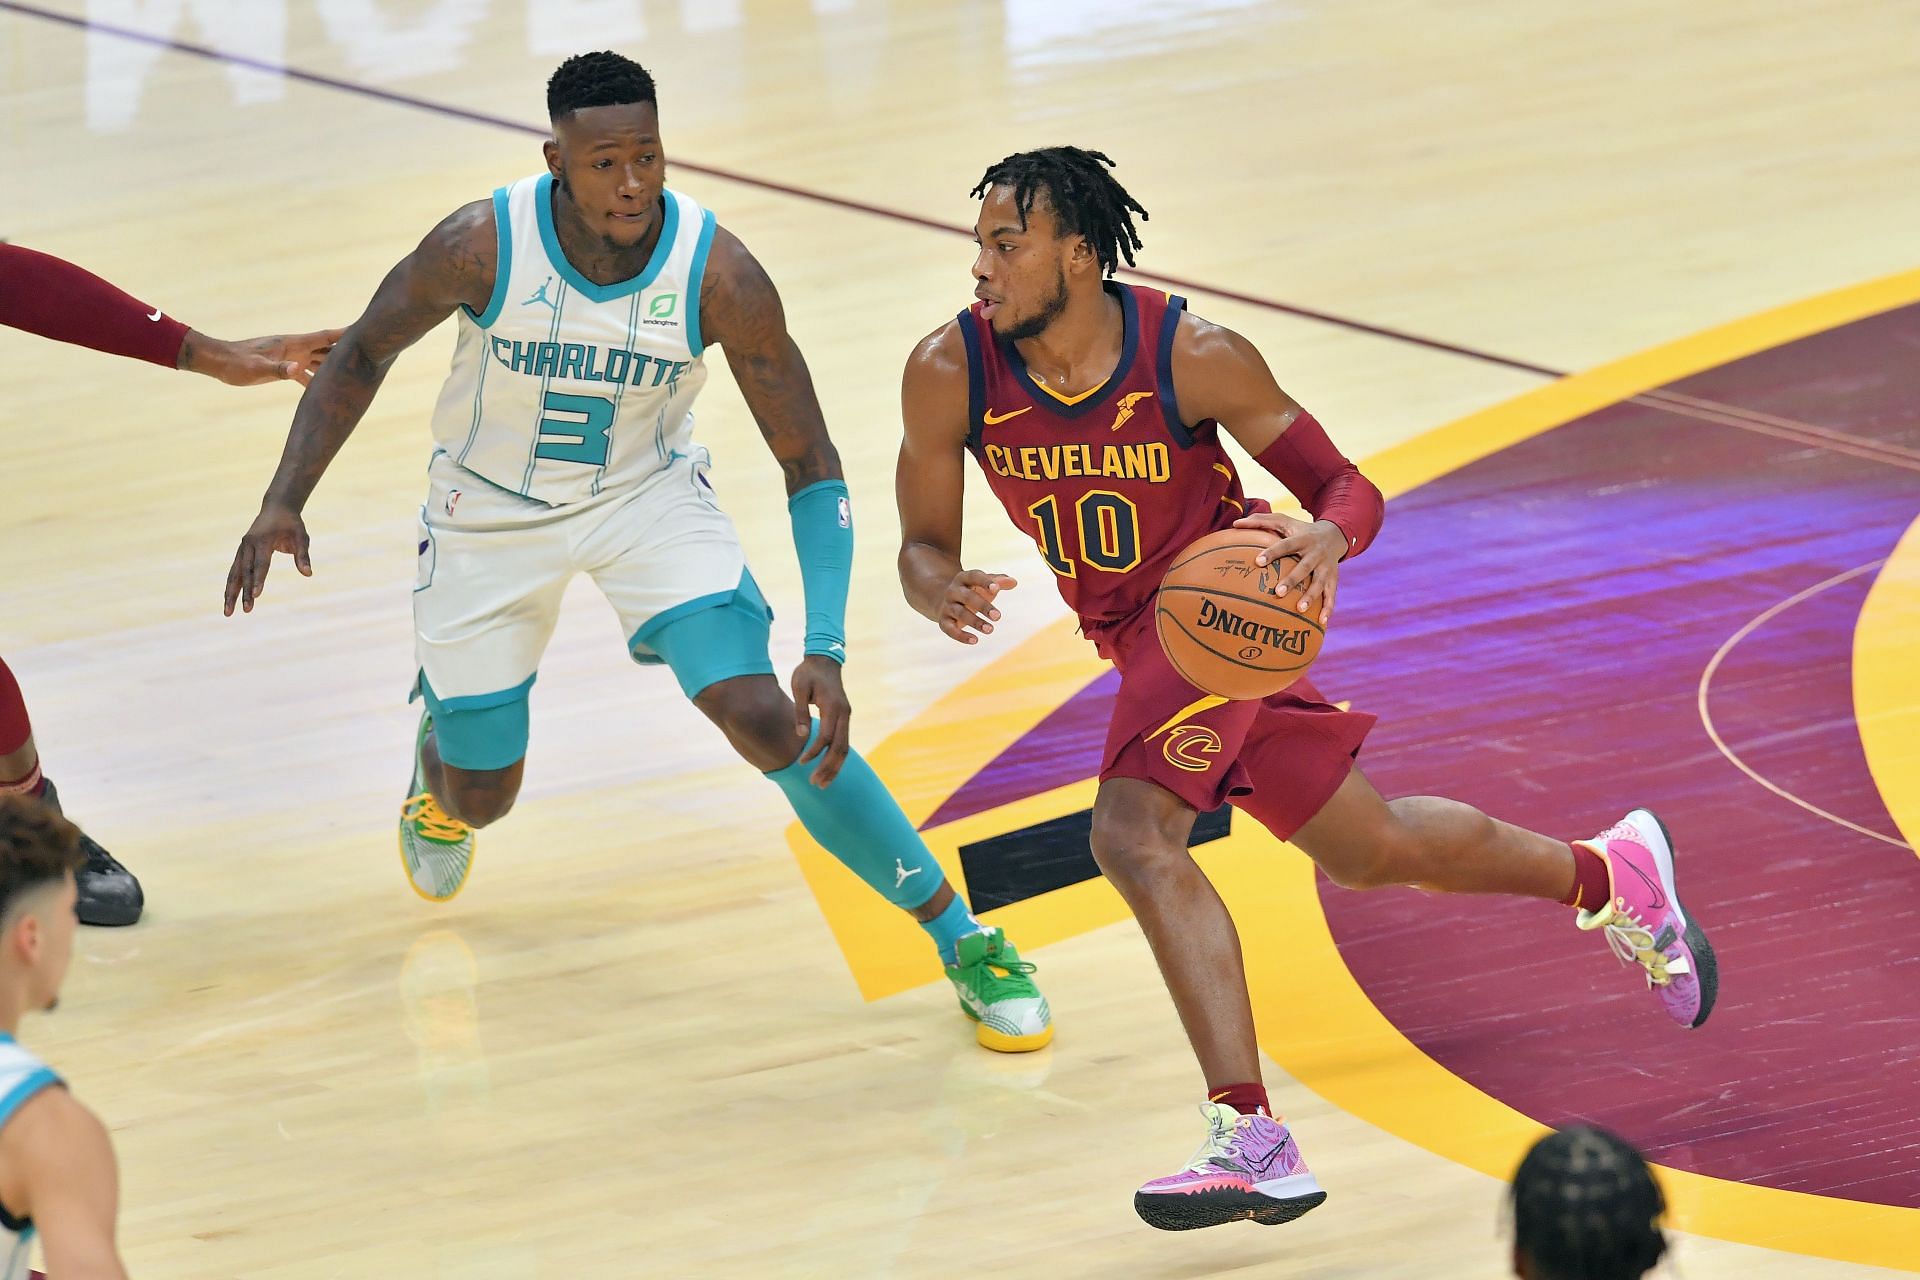 The Charlotte Hornets and the Cleveland Cavaliers will meet for the first time this season on Friday